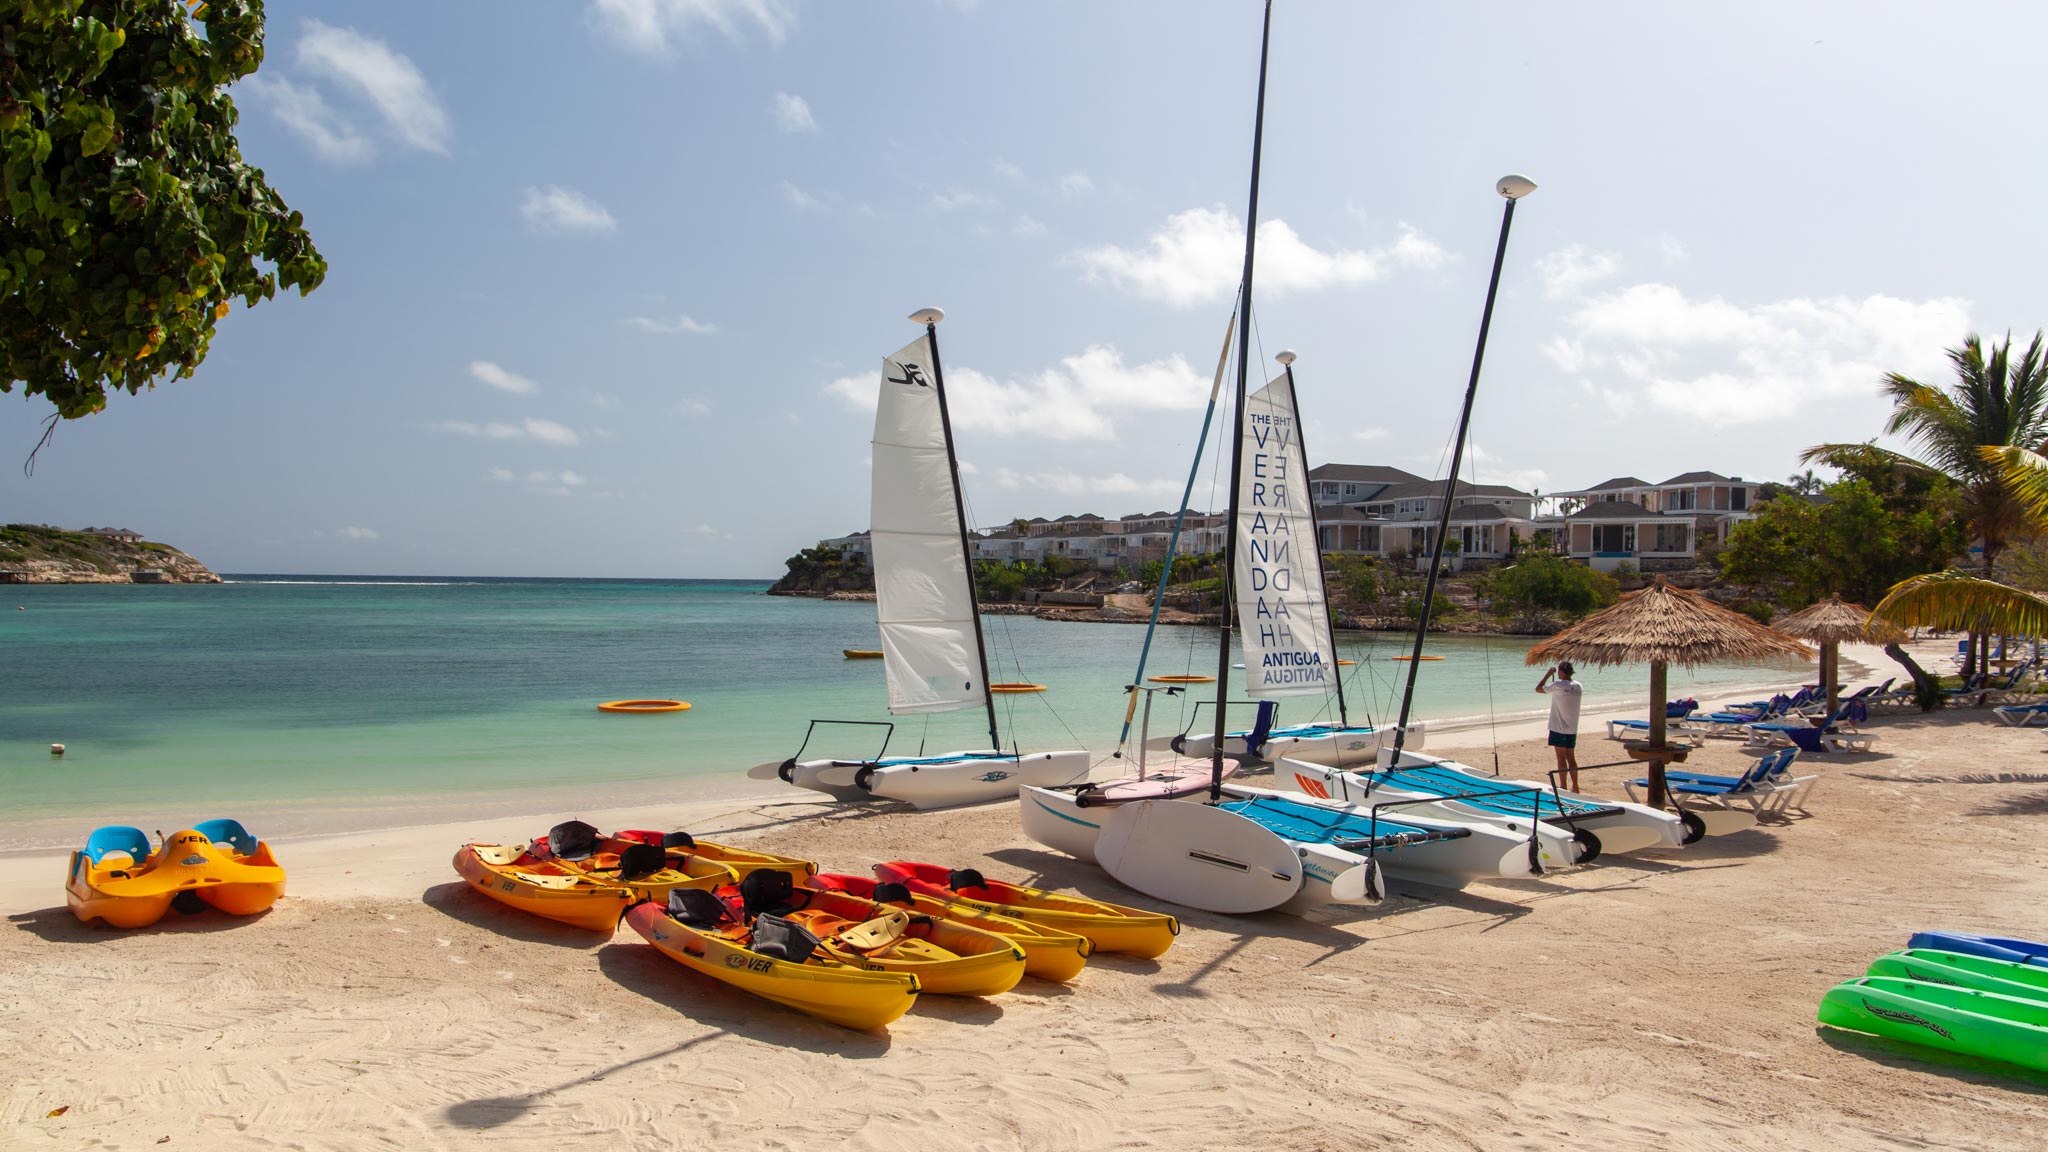 Kayaks and sail boats lined up on a beach in Antigua